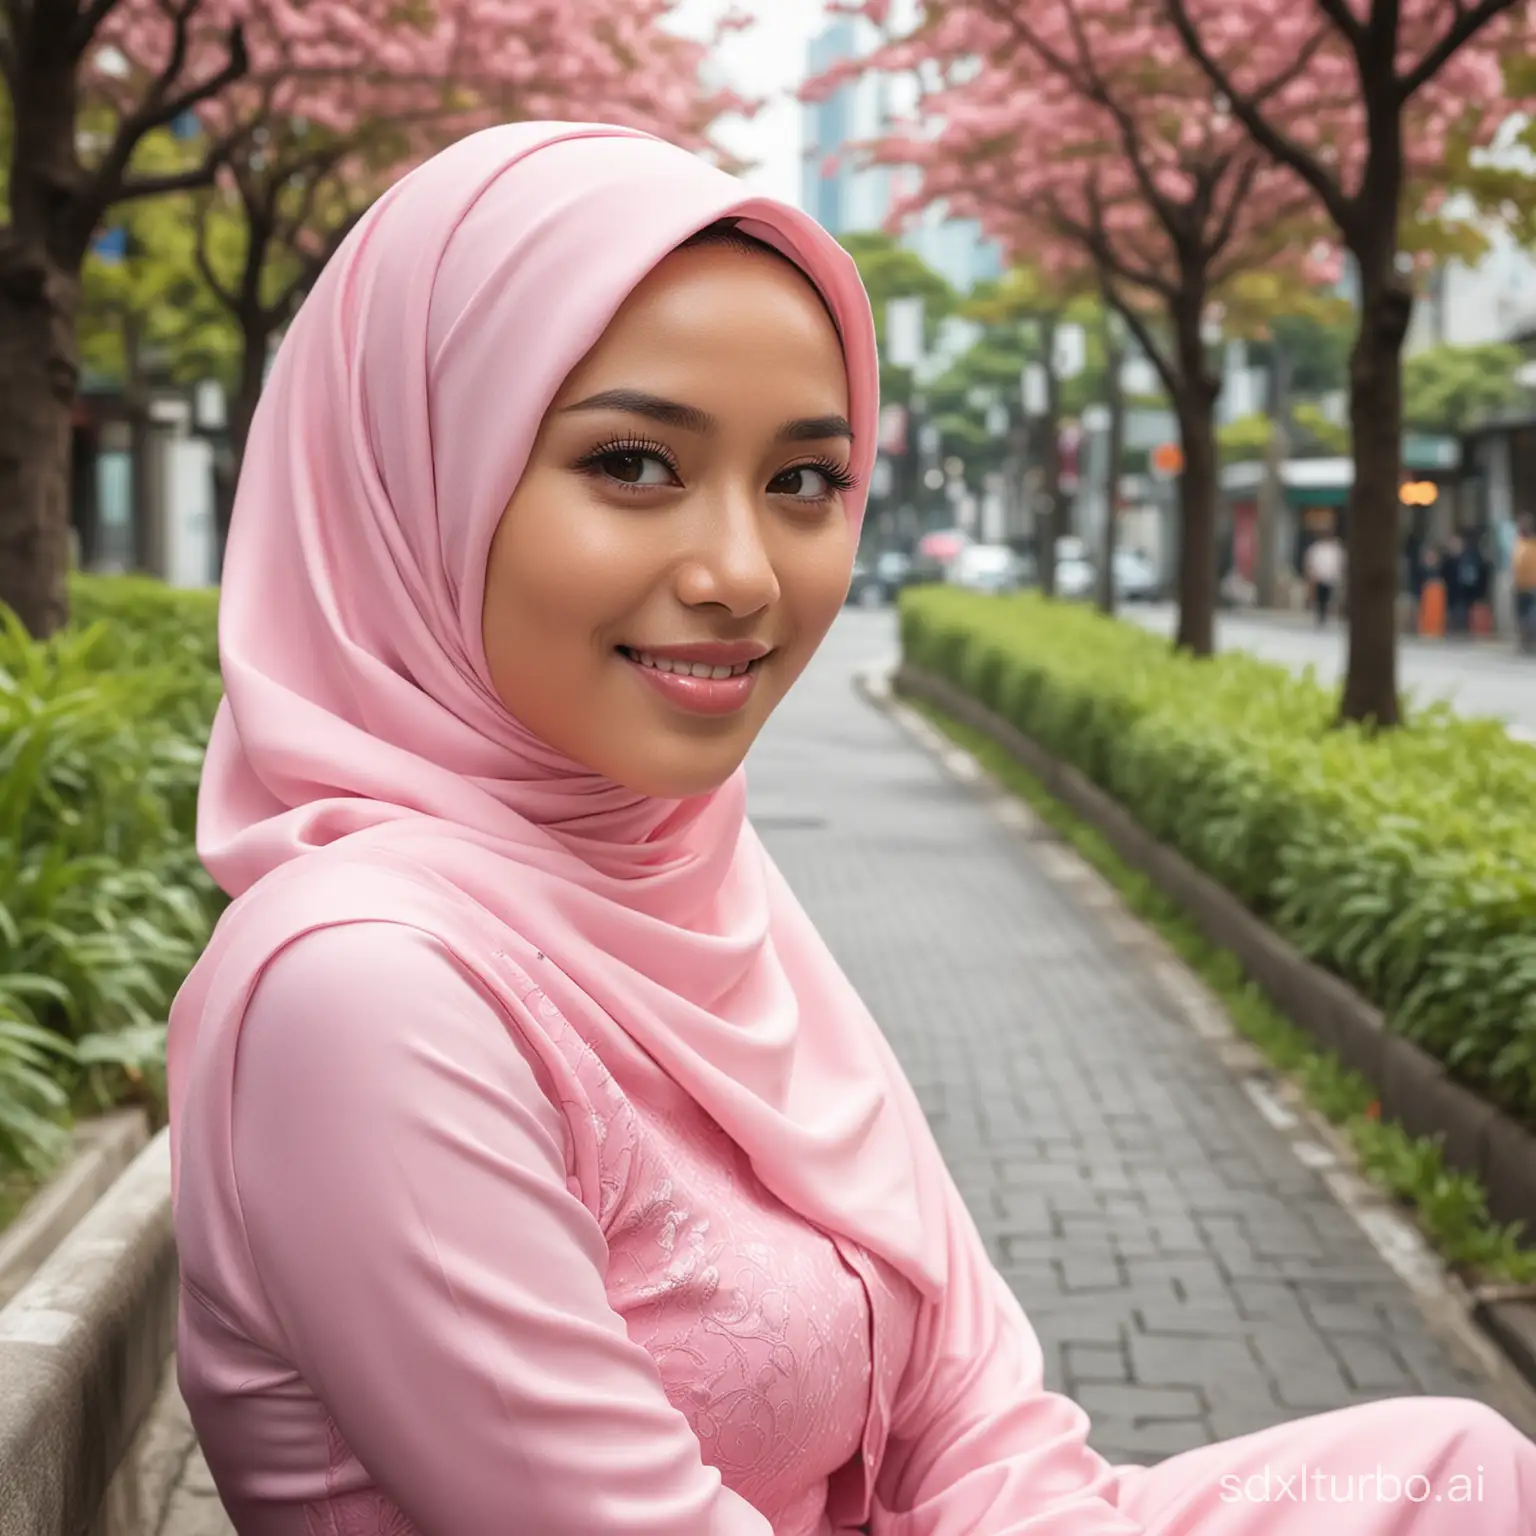 Elegant-Indonesian-Woman-in-Pink-Dress-and-Hijab-Smiling-Near-Tokyo